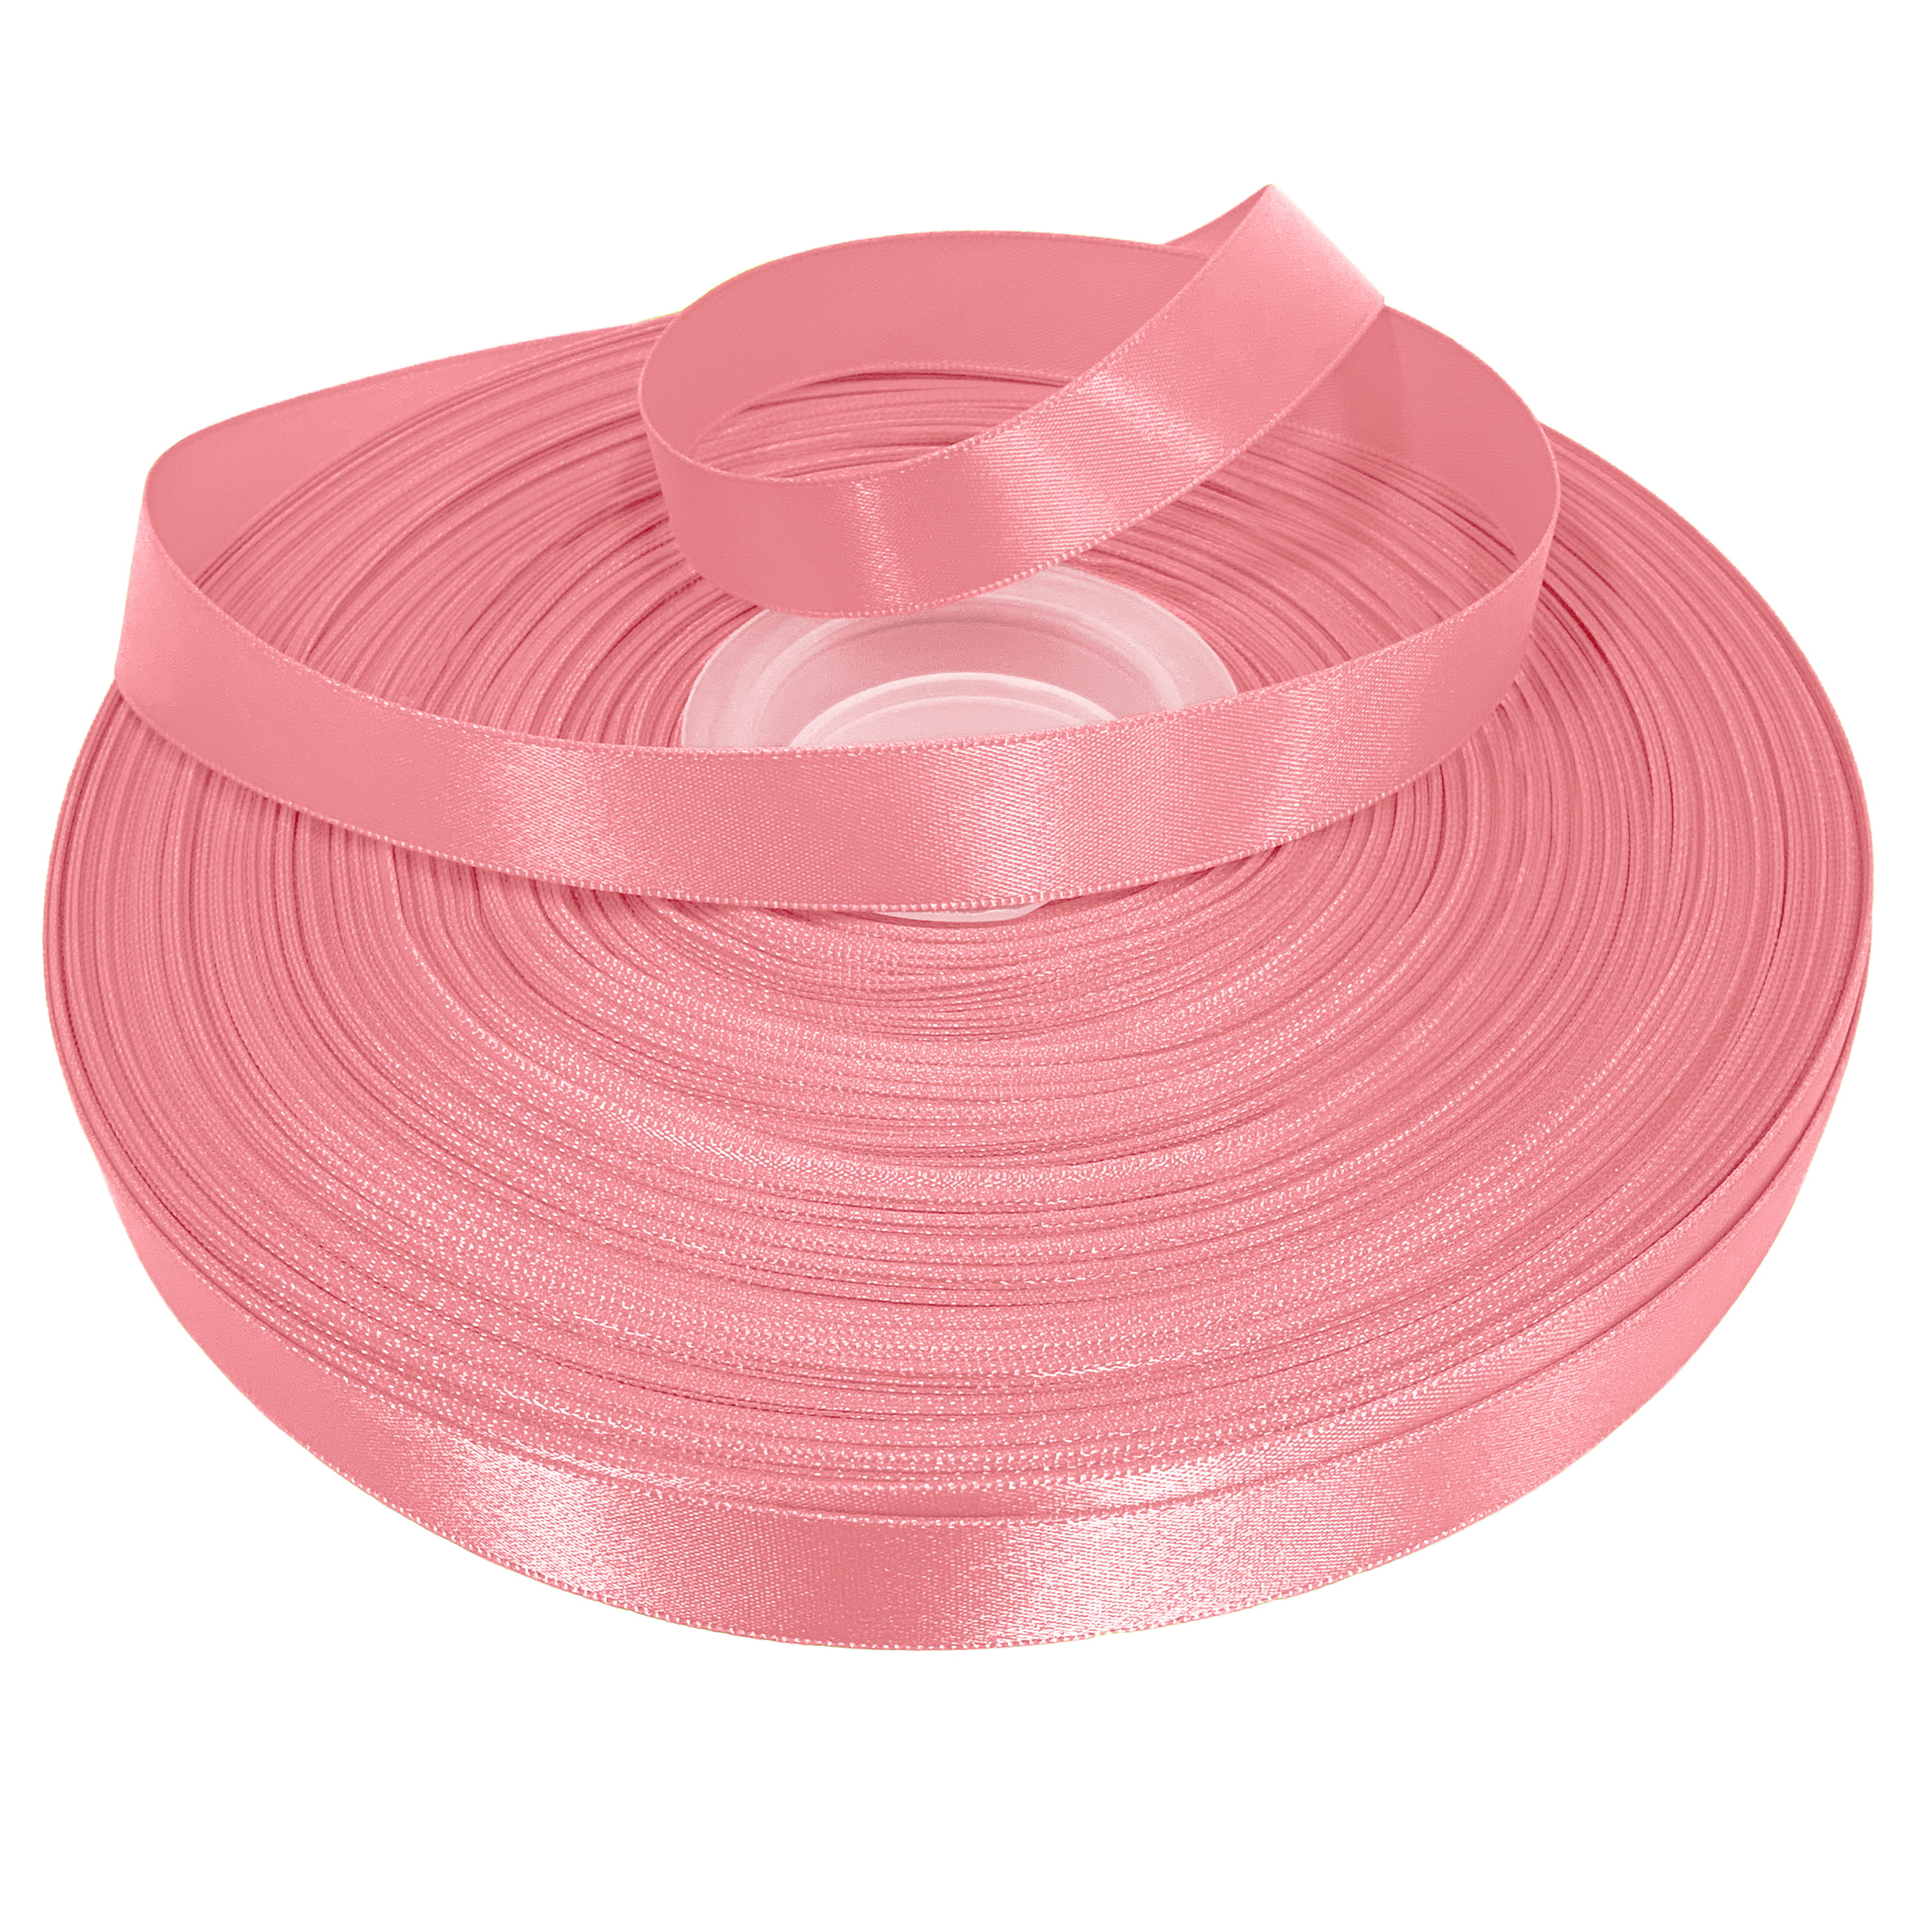 Double-faced Rose Mauve Pink Satin Ribbon 1 1/2 Inch Wide X 8